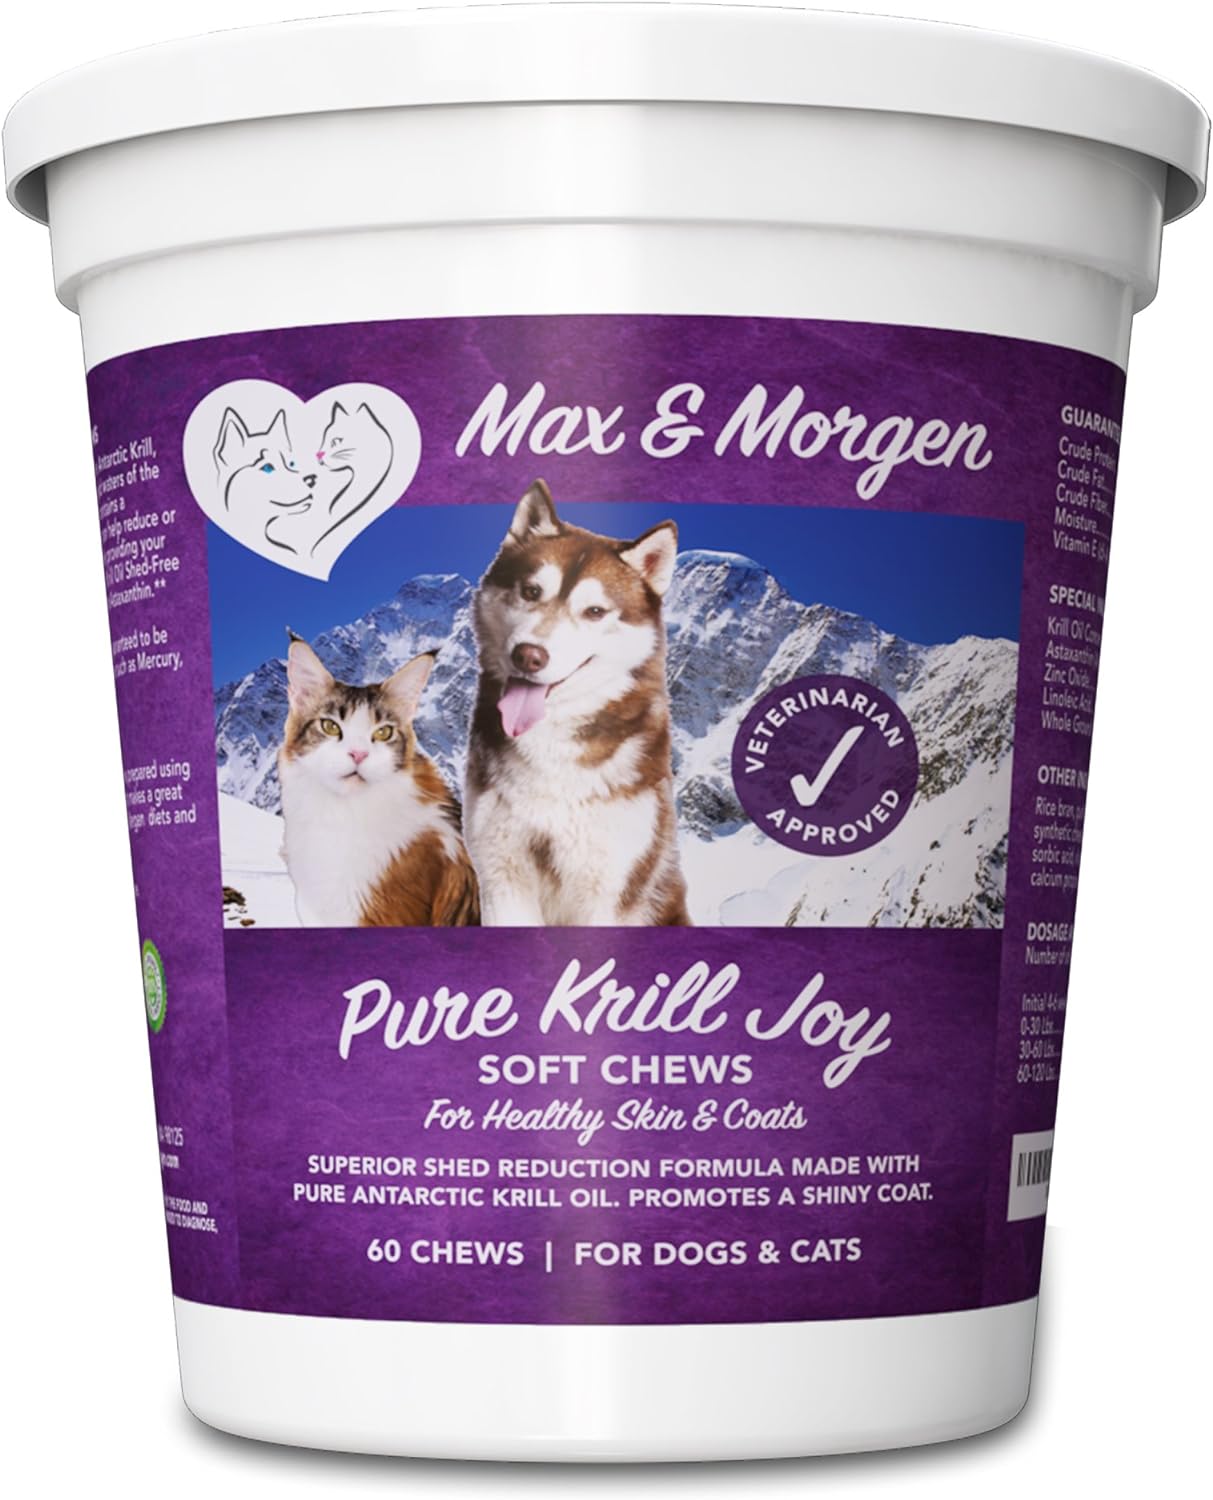 Pure Krill Joy, Antarctic Krill Oil Soft Chews for Dogs, Rich in Omega 3 and Antioxidants, Unique Shed Reducing Formula, Improves Skin and Coat, Low Allergen, Made in The USA, 60 Soft Chews